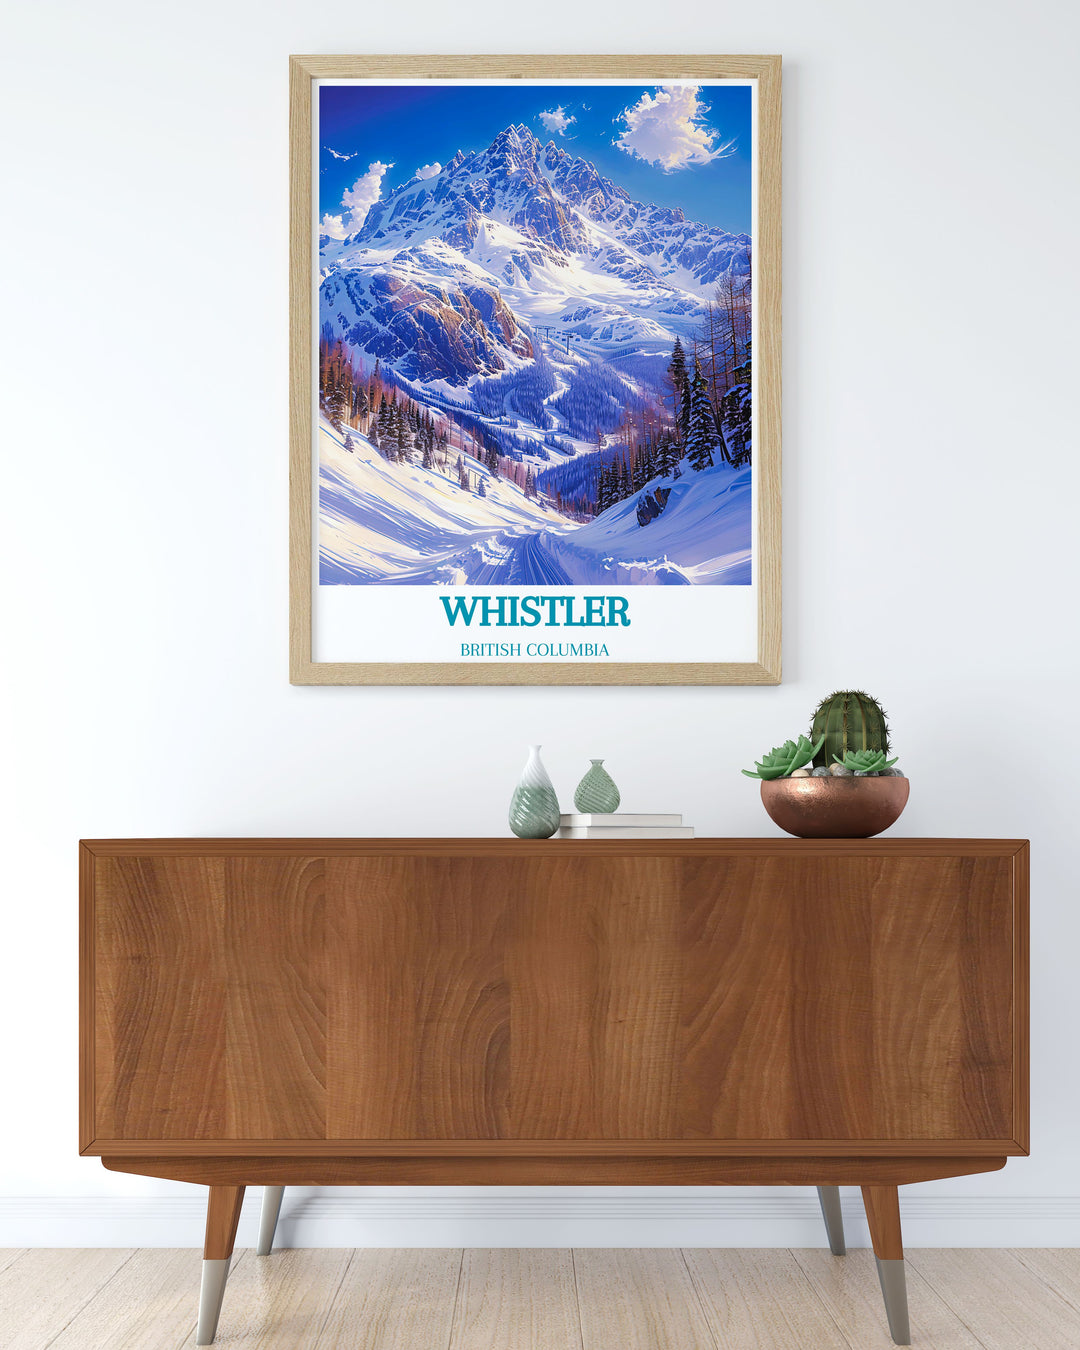 Elegant gallery wall art of Whistler Blackcomb, capturing the scenic ski slopes and bustling village. This artwork adds a touch of sophistication and natural beauty to your home, celebrating one of Canadas premier ski destinations.